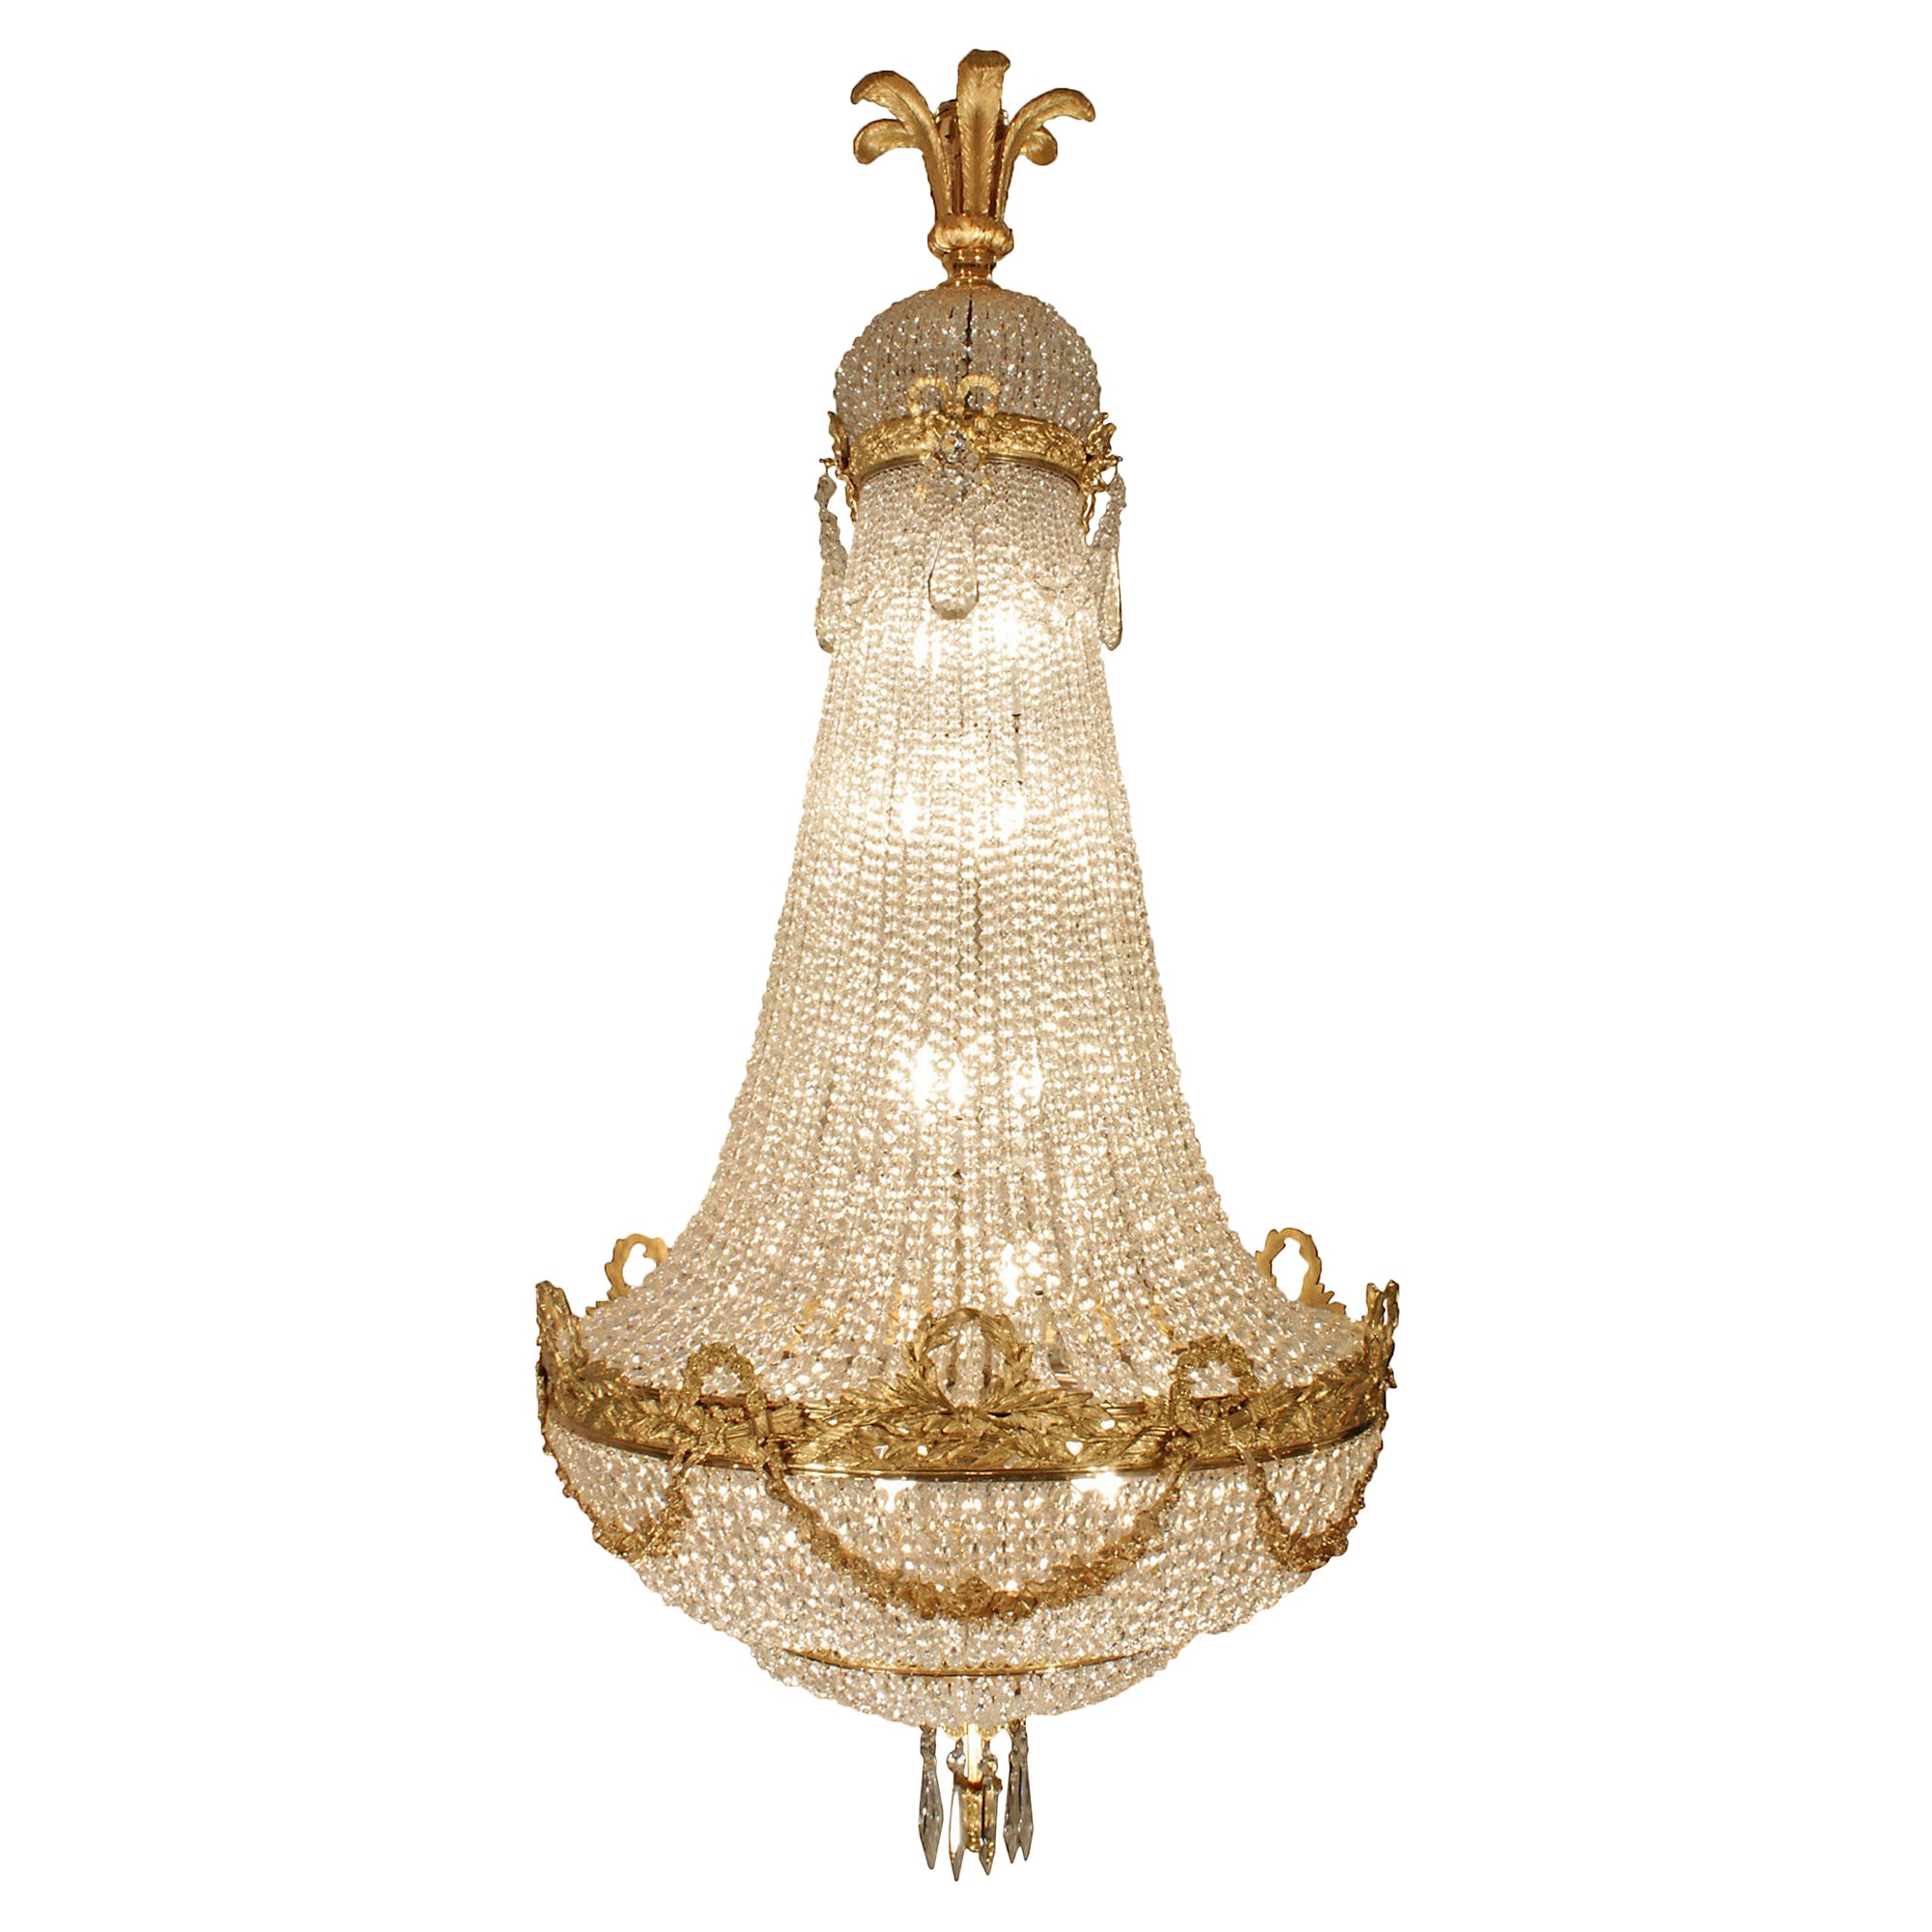 French Mid-19th Century Louis XVI Style Baccarat Crystal and Ormolu Chandelier